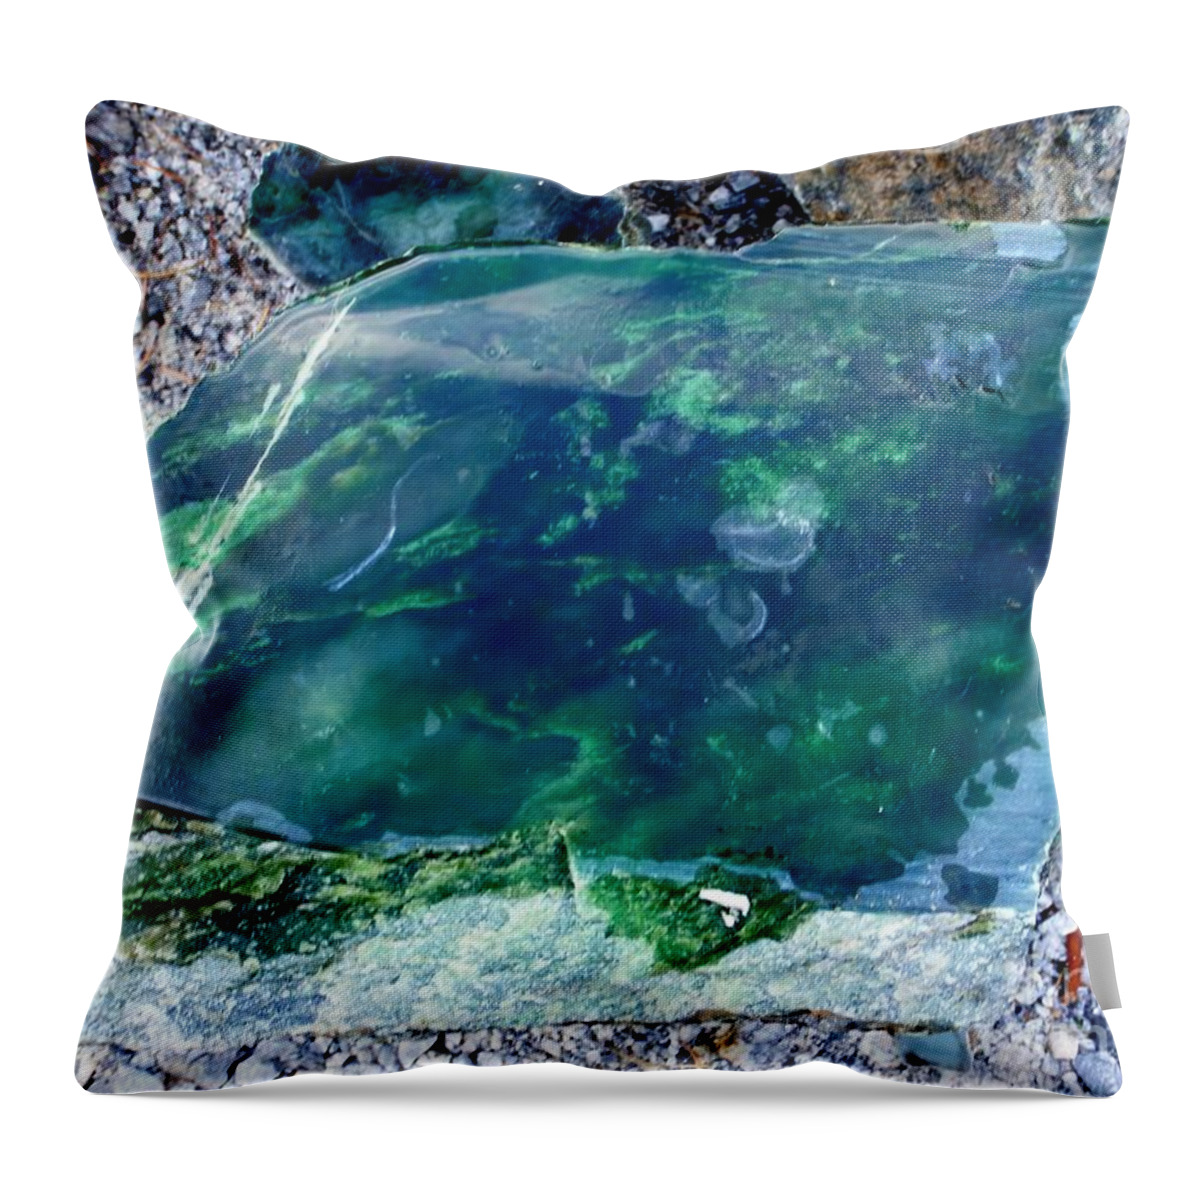 Jade Throw Pillow featuring the photograph Raw Jade Rock by Mary Deal